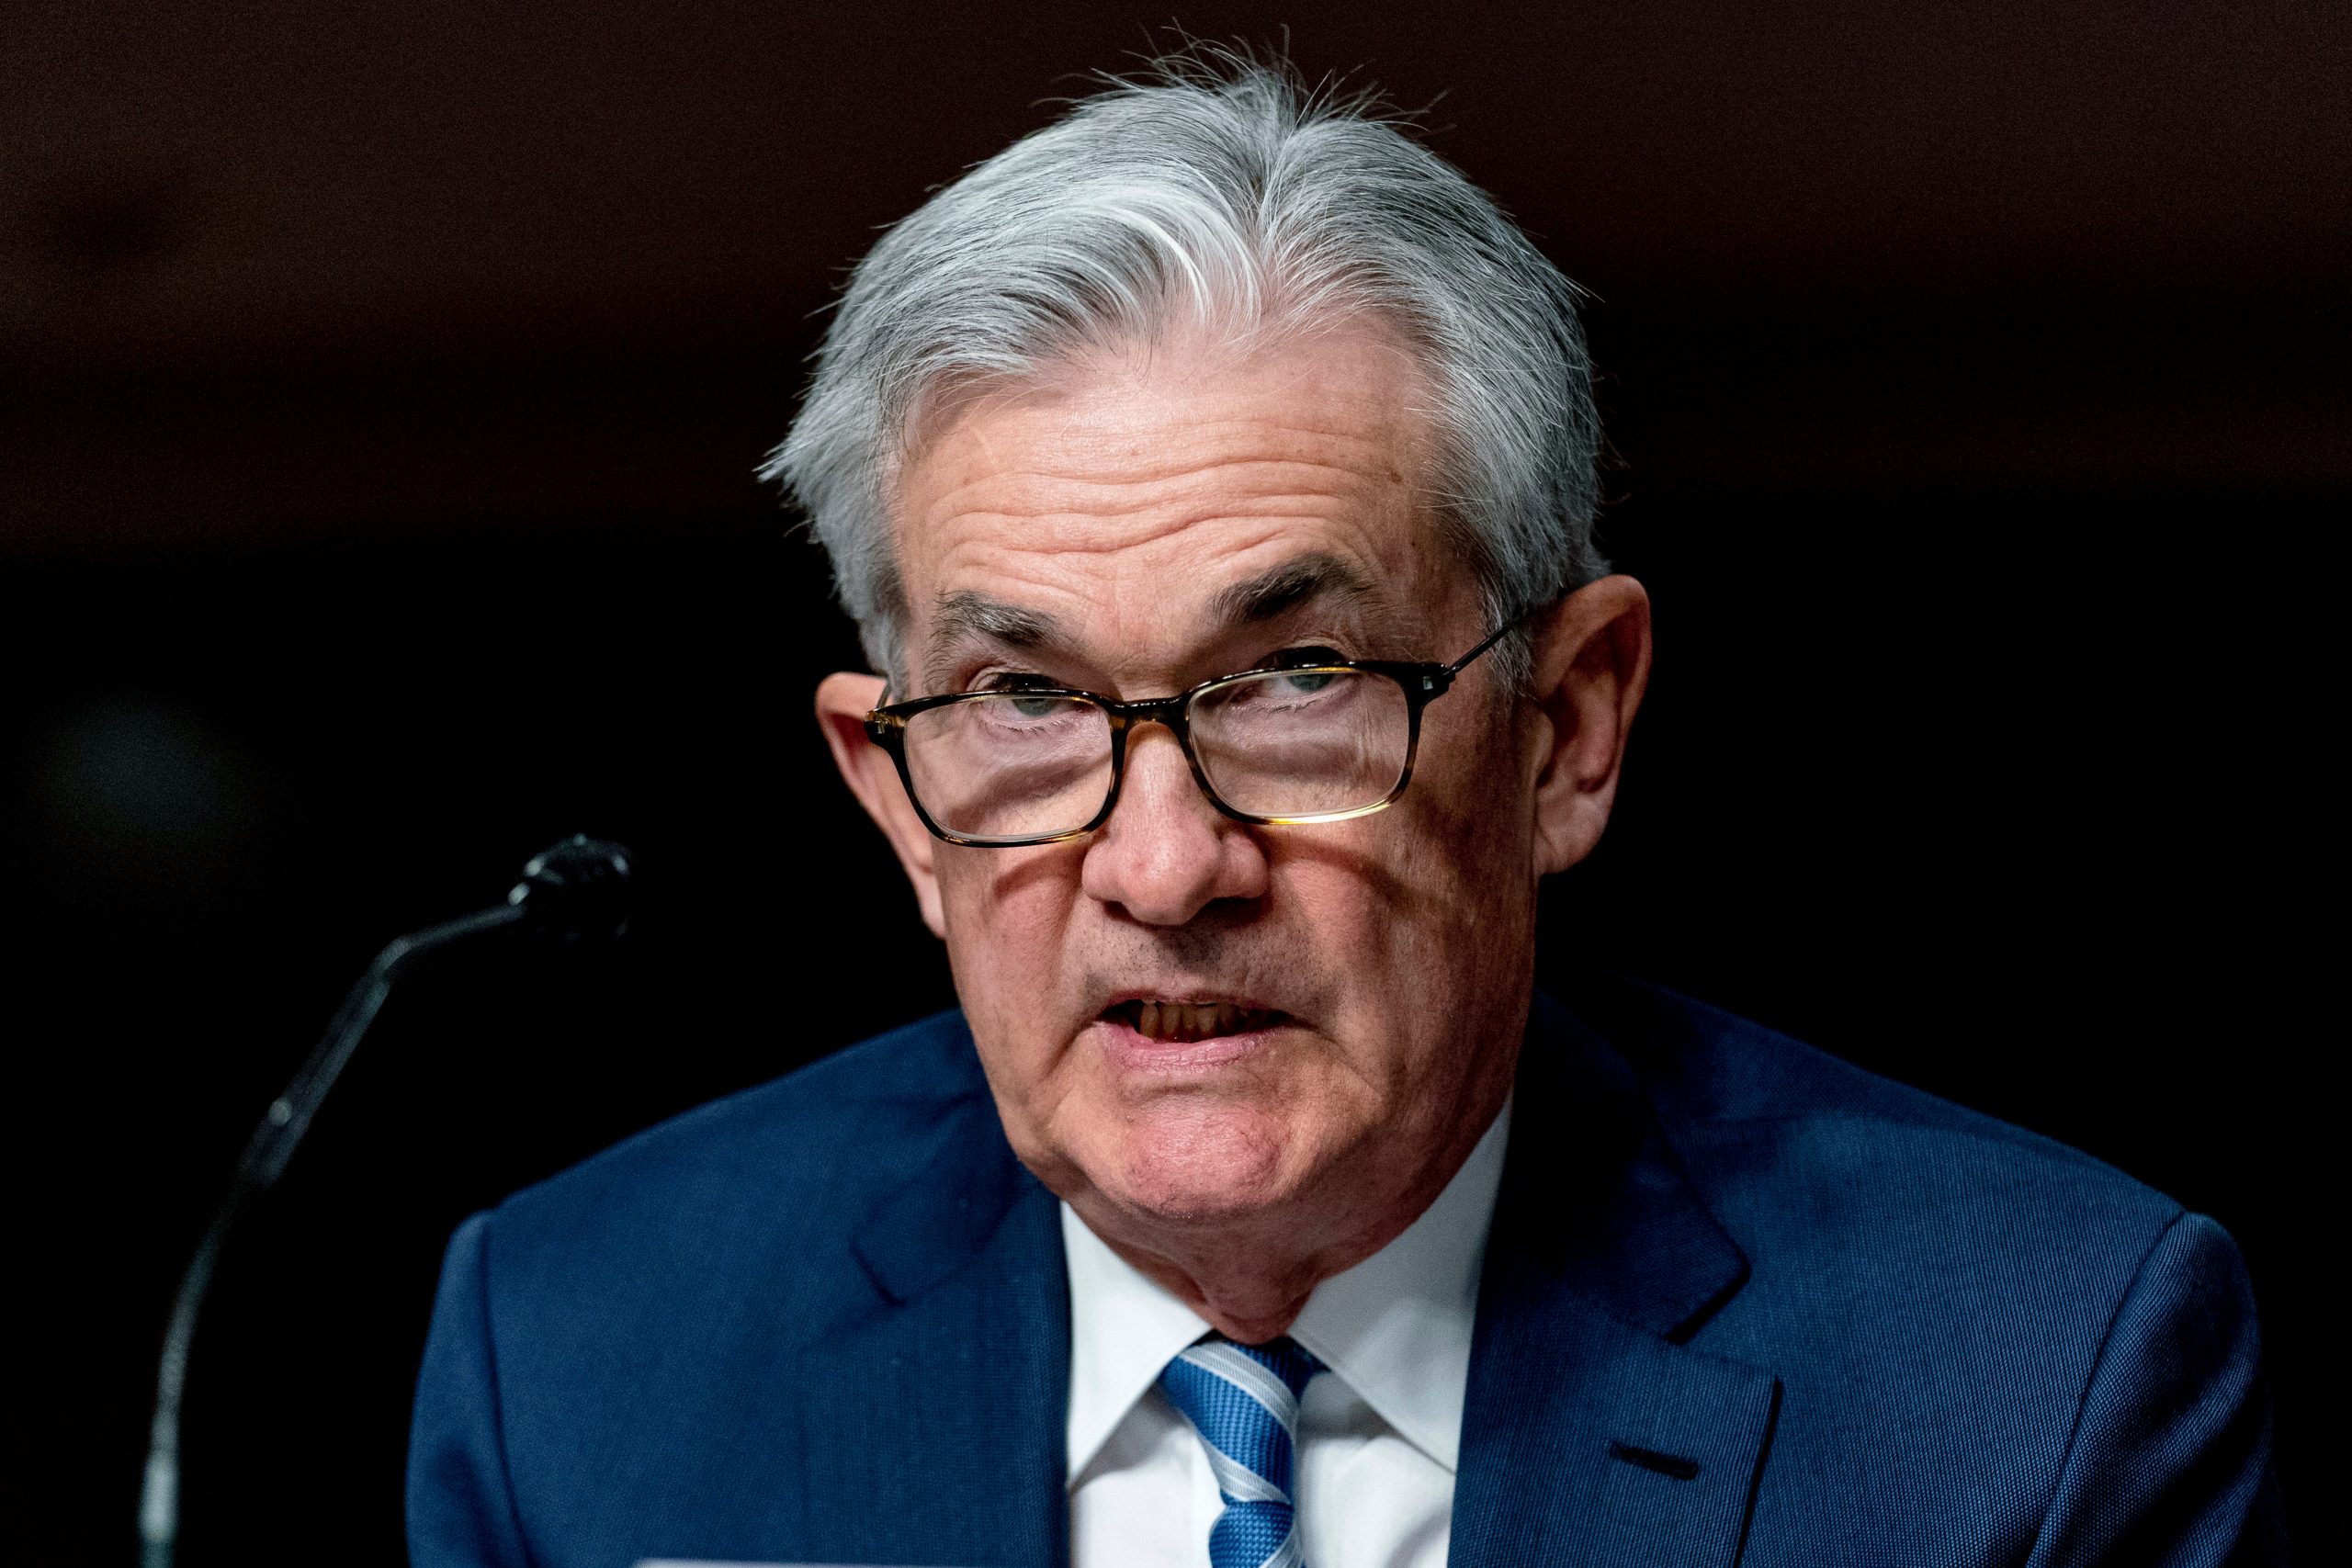 Jackson Hole Symposium: When and Where to watch Fed chair Powell’s speech